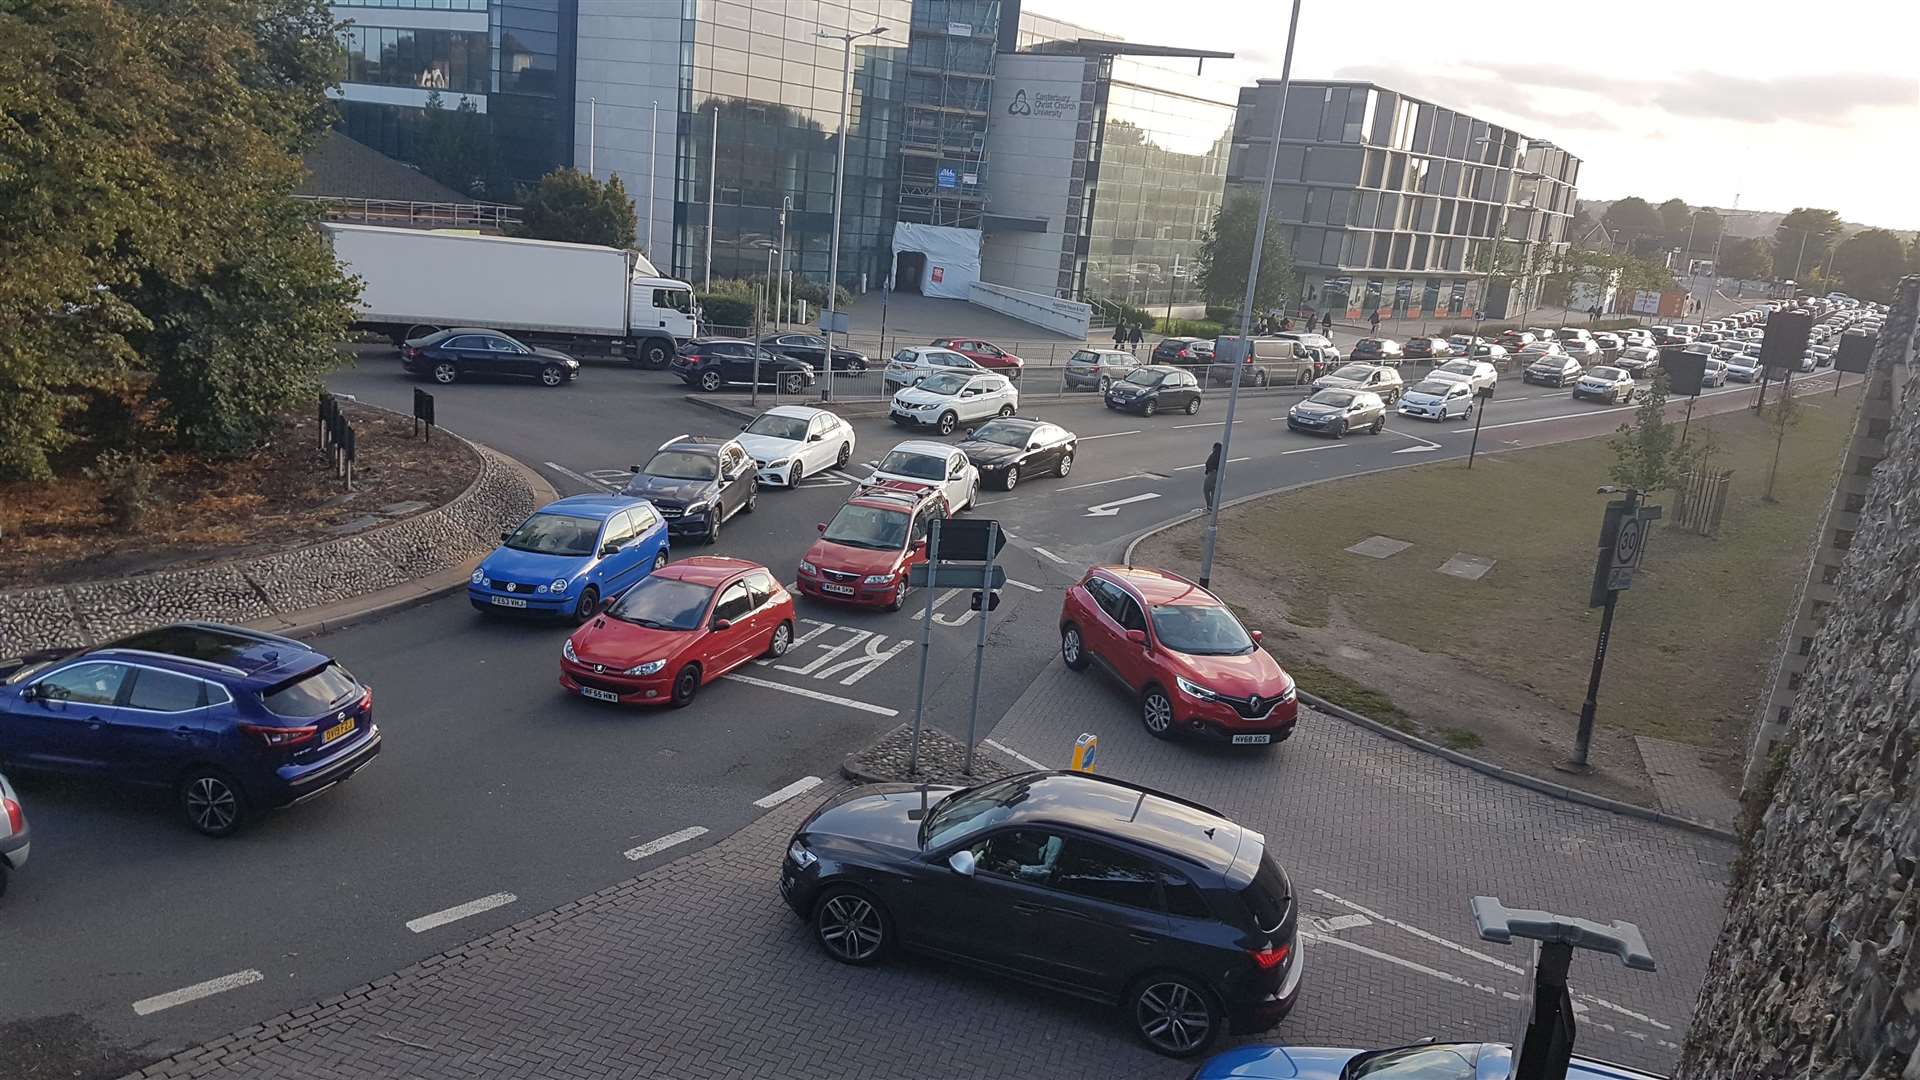 Riding Gate roundabout snarled up in all directions